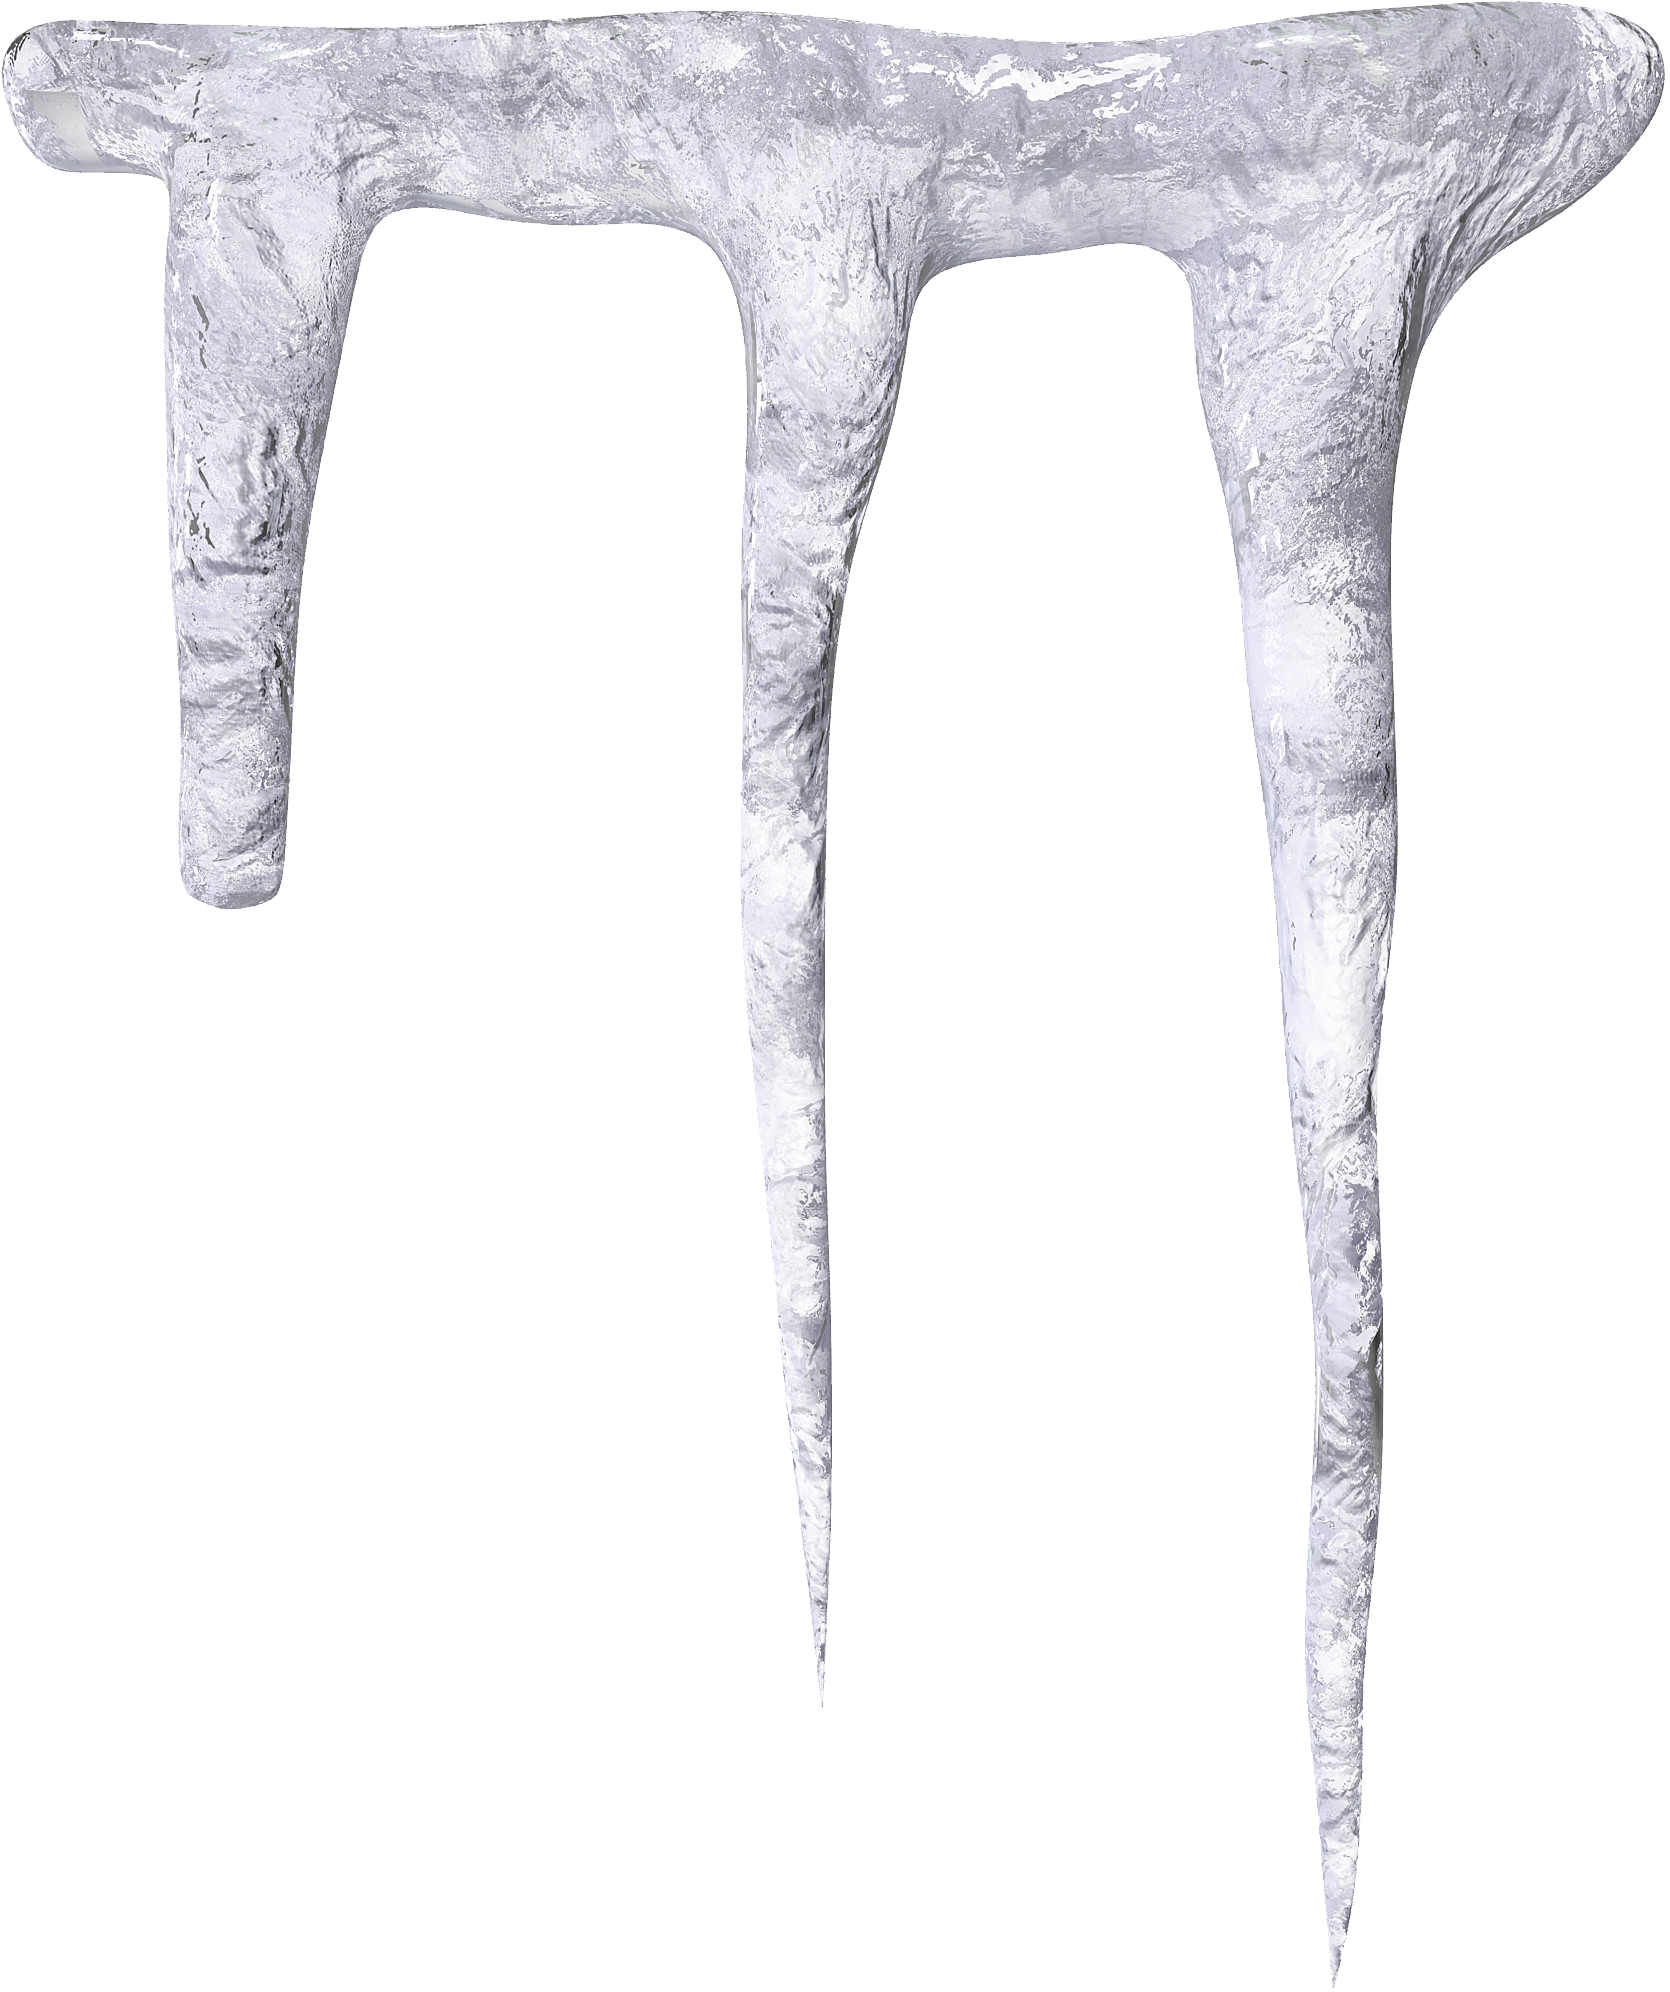 PNG Icicles - 49297